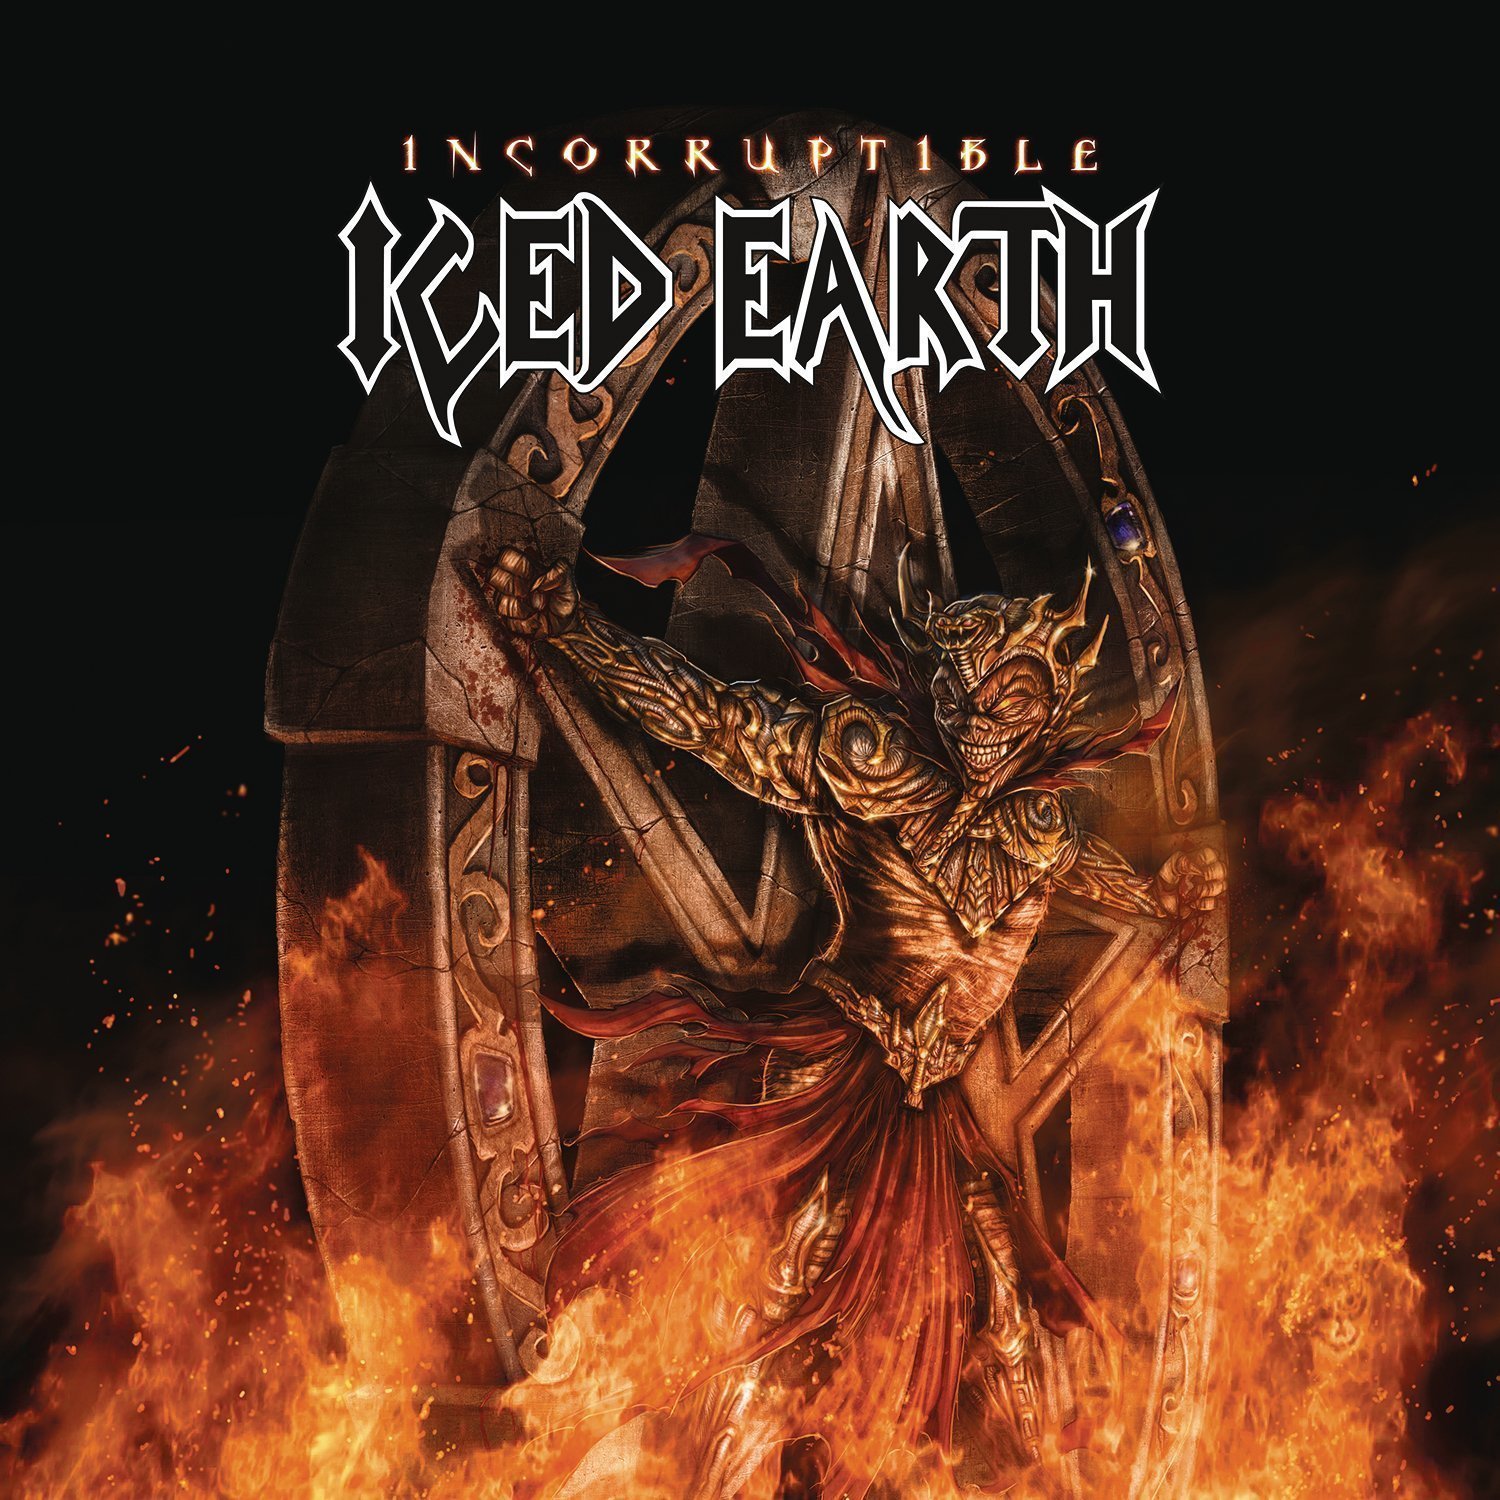 Disco in vinile Iced Earth Incorruptible (2 LP)